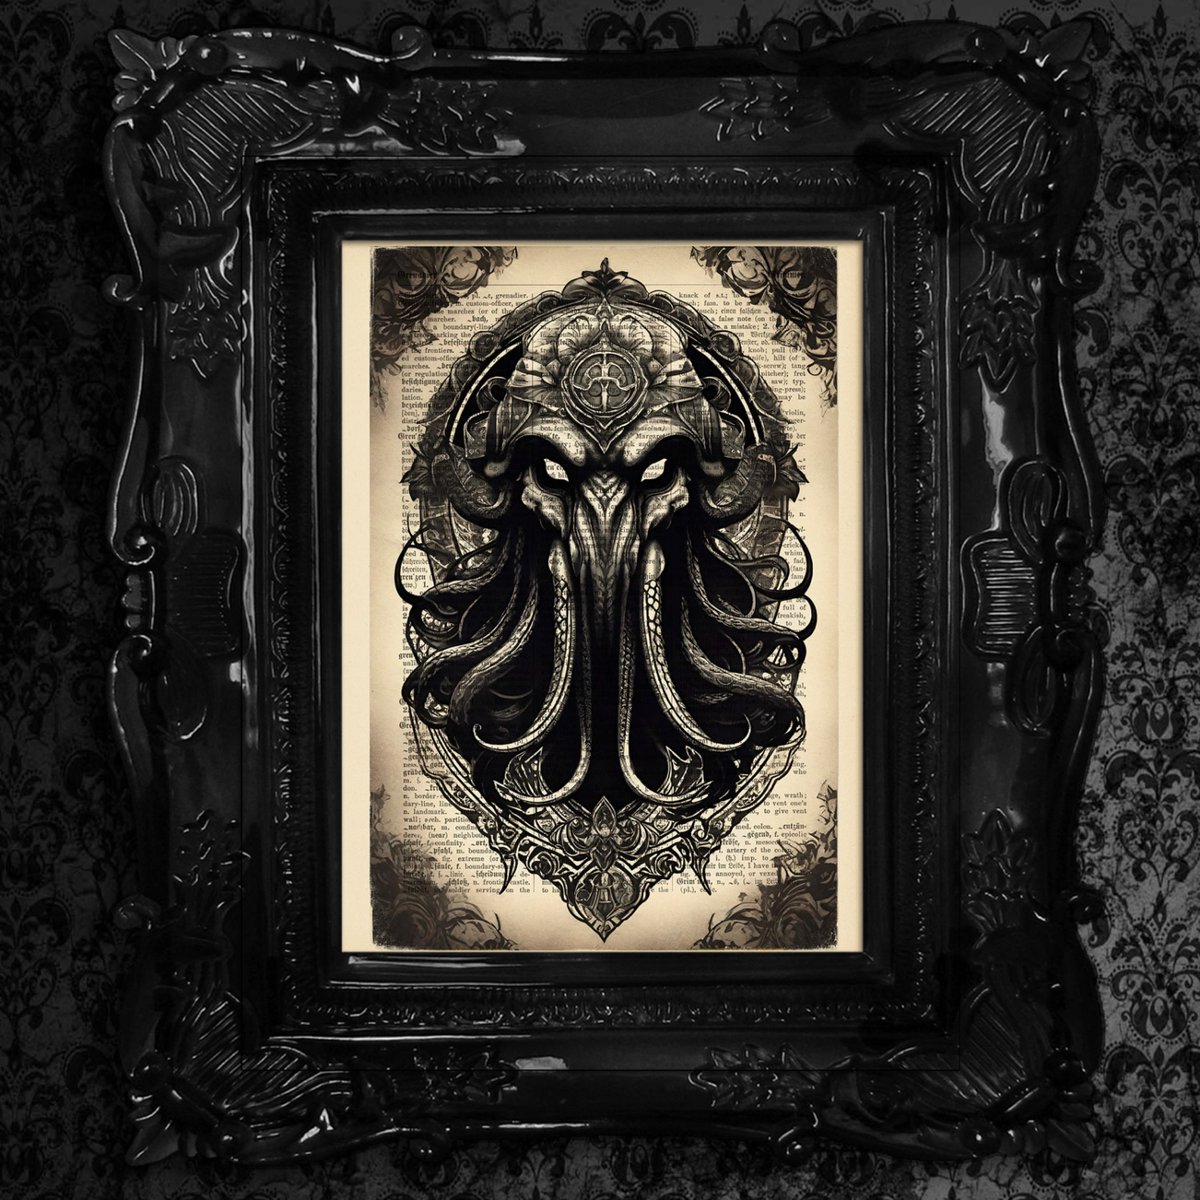 Indulge in the dark mystique of 'Cthulhu Gothic Reverie.' 🖤 This art print seamlessly combines Lovecraftian horror with Victorian elegance.
art4giftvintageart.etsy.com/listing/157273…
#VictorianDecor #ArtPrints #LovecraftianHorror #EldritchAesthetics #MacabreBeauty #art #Cthulhu #gothic #horror